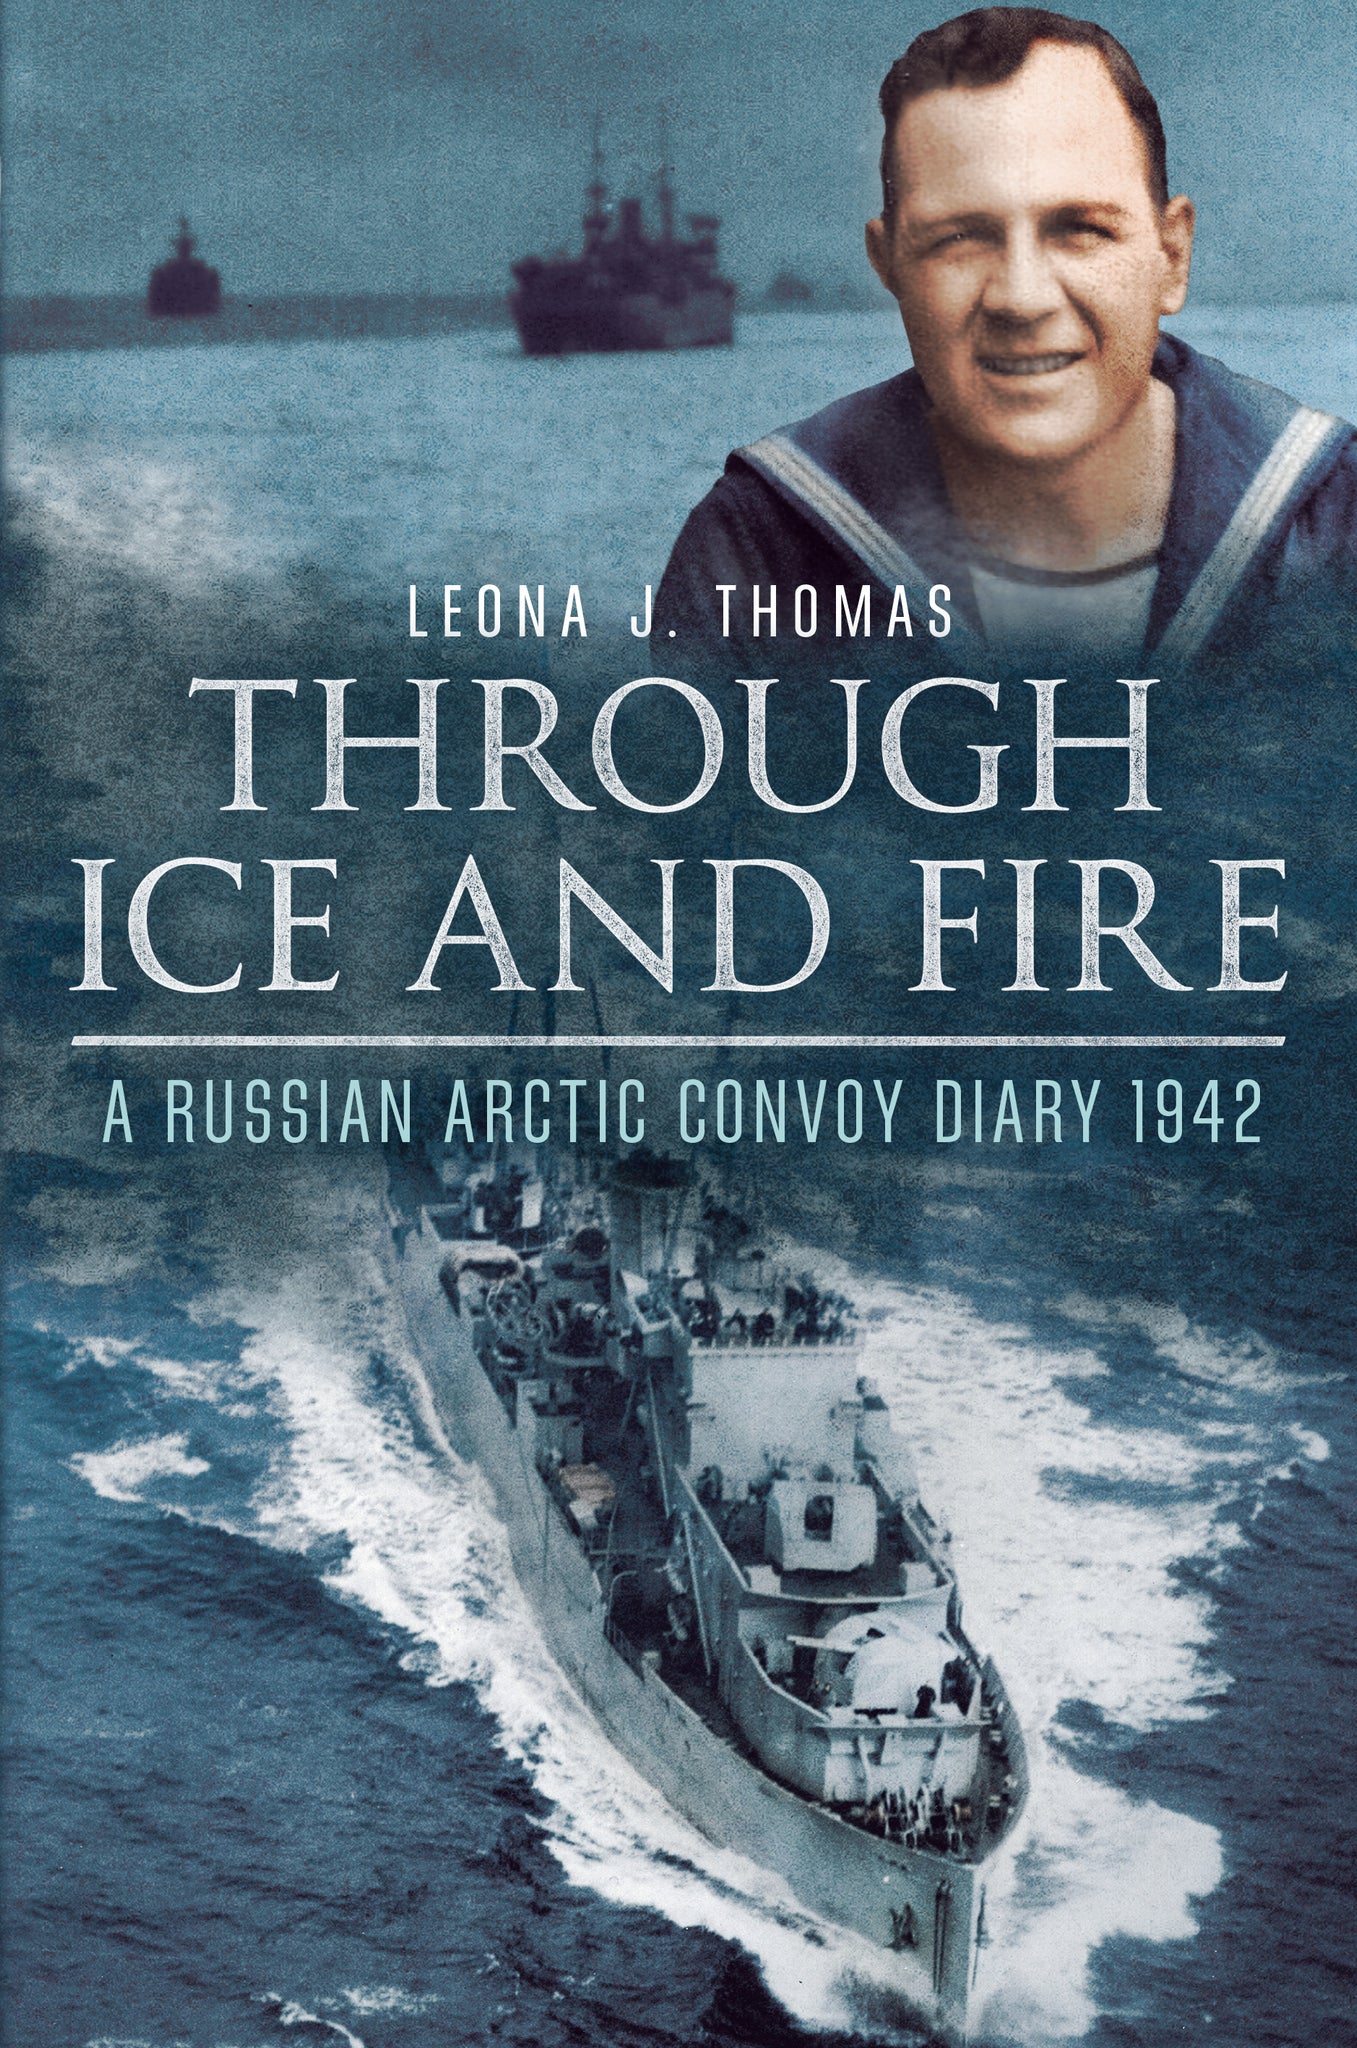 Through Ice and Fire: A Russian Arctic Convoy Diary 1942 - published by Fonthill Media